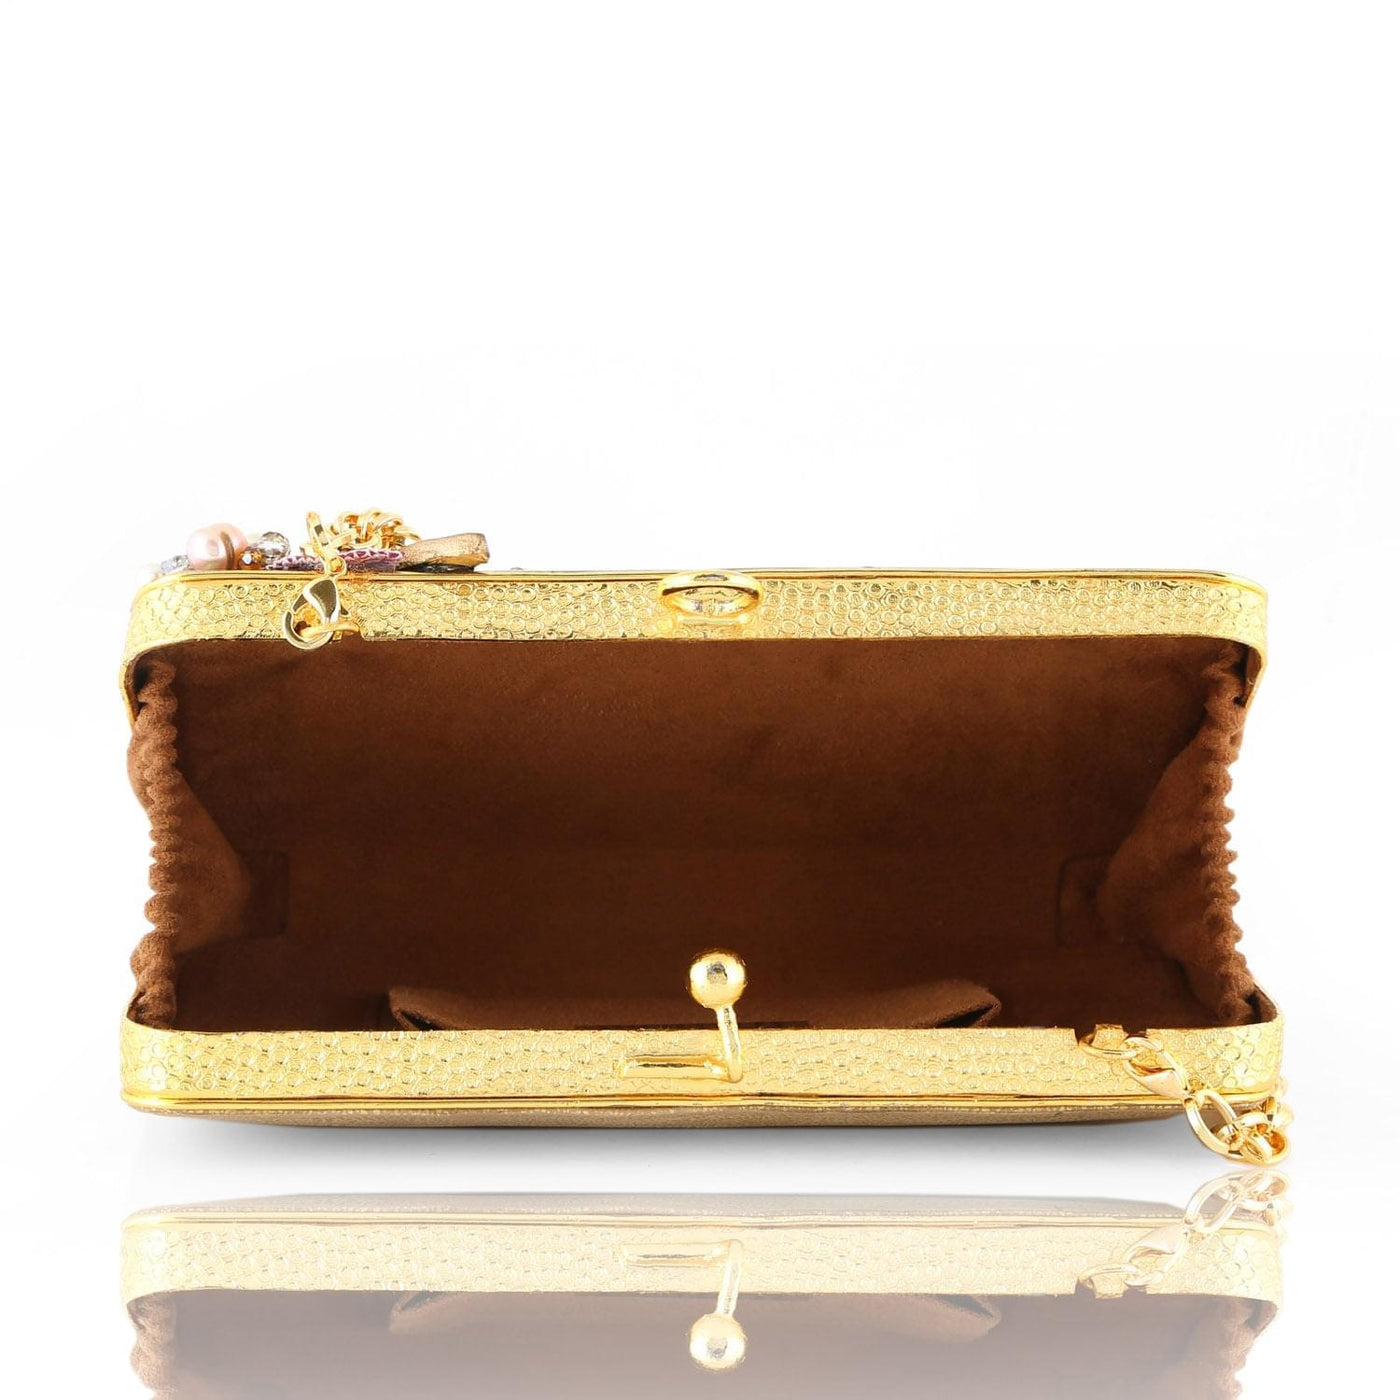 Ampelia Abalon Clutch - Women's clutch bag in gold and shell